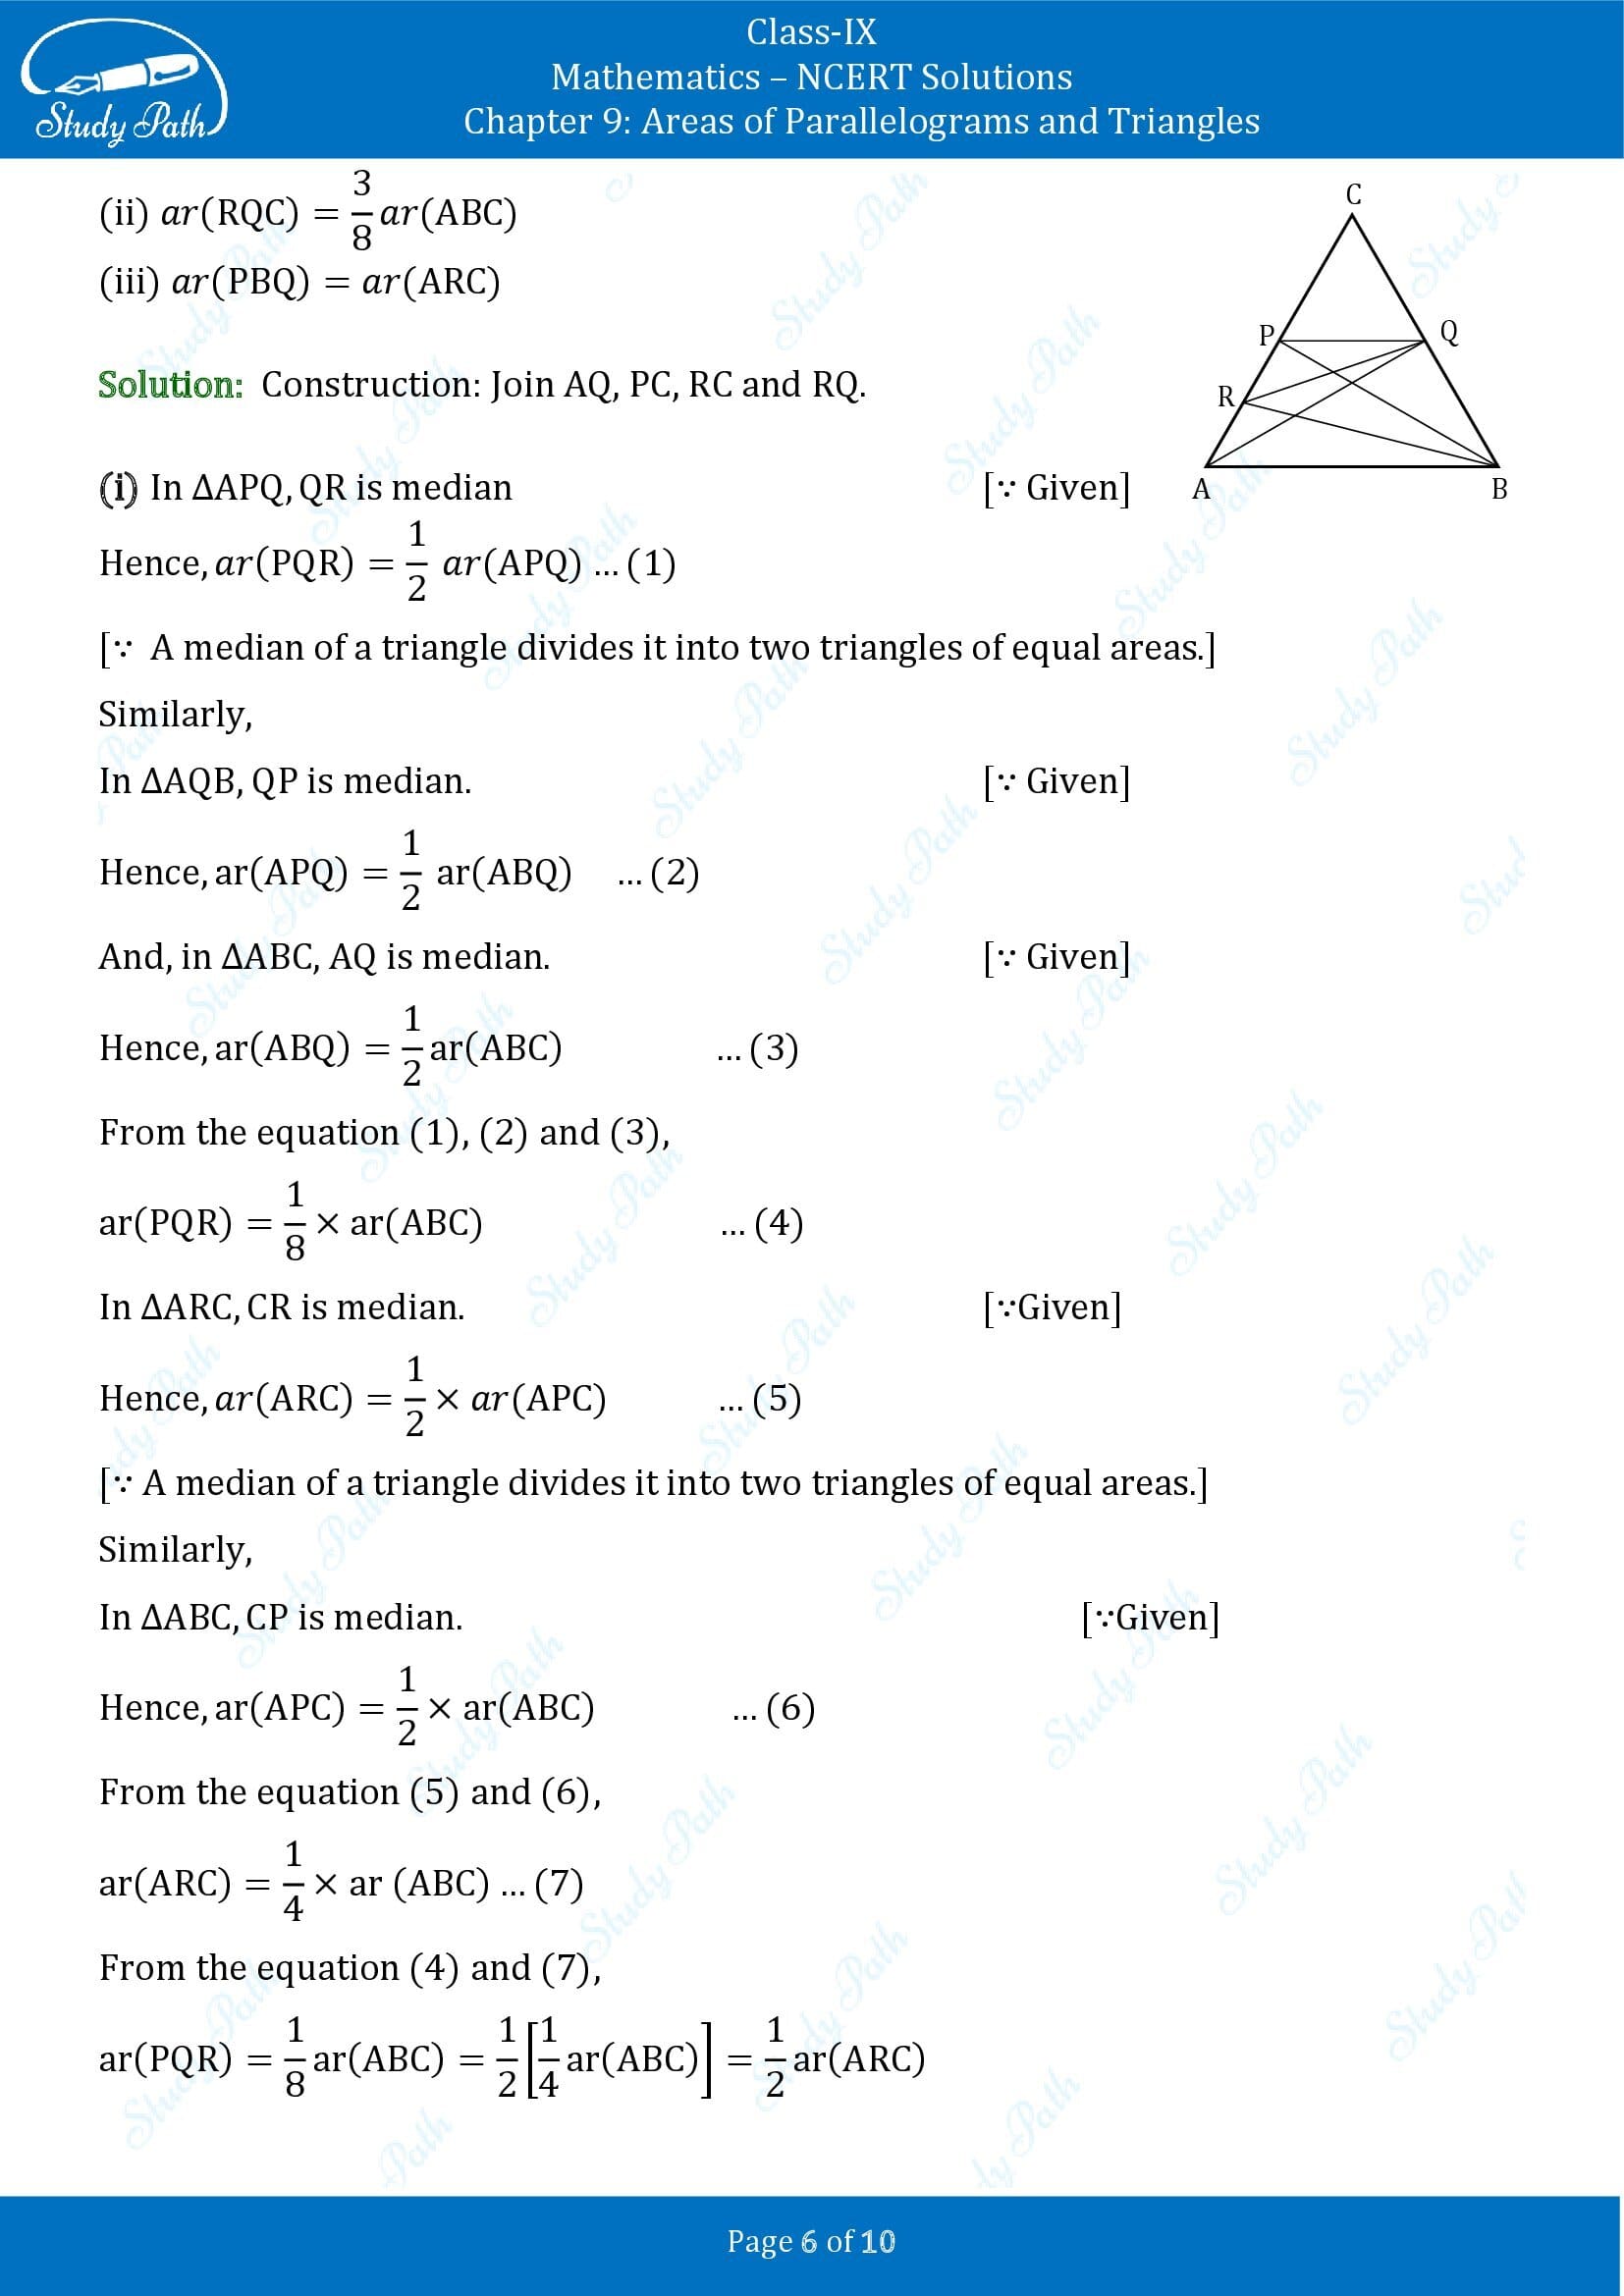 NCERT Solutions for Class 9 Maths Chapter 9 Areas of Parallelograms and Triangles Exercise 9.4 00006